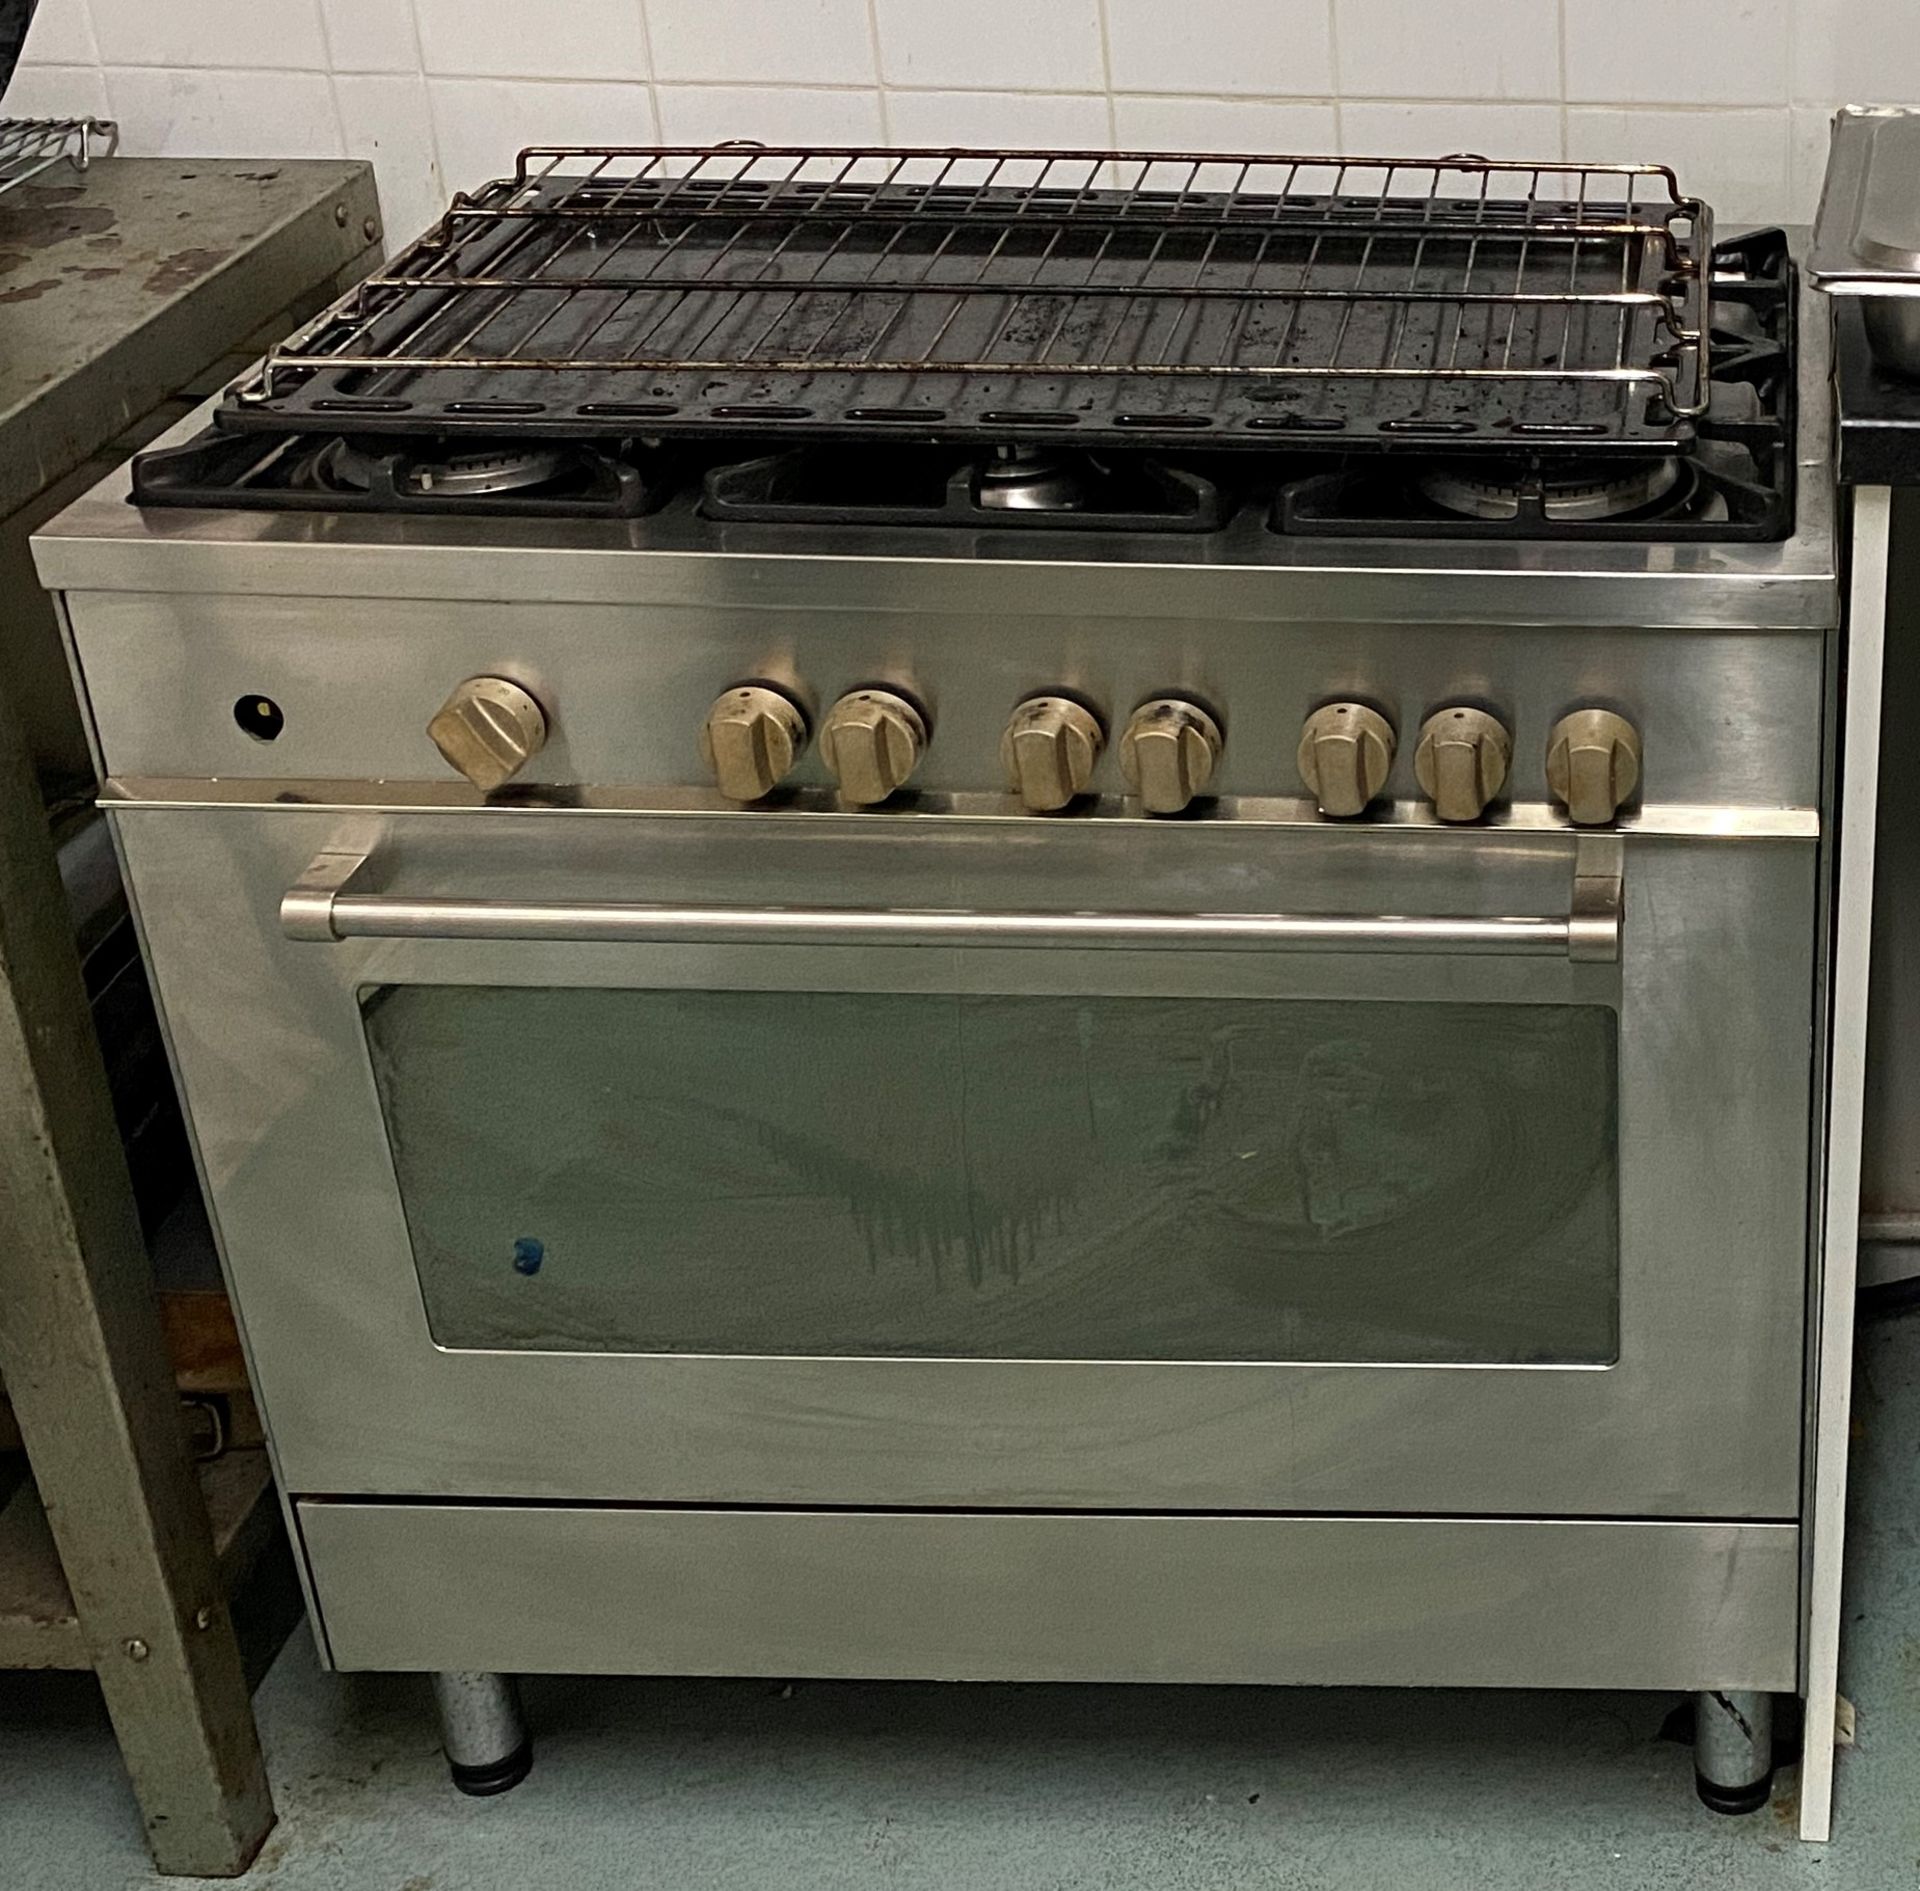 Unbranded stainless steel 6 ring gas hob and oven - Please note, this is in an upstairs kitchen.